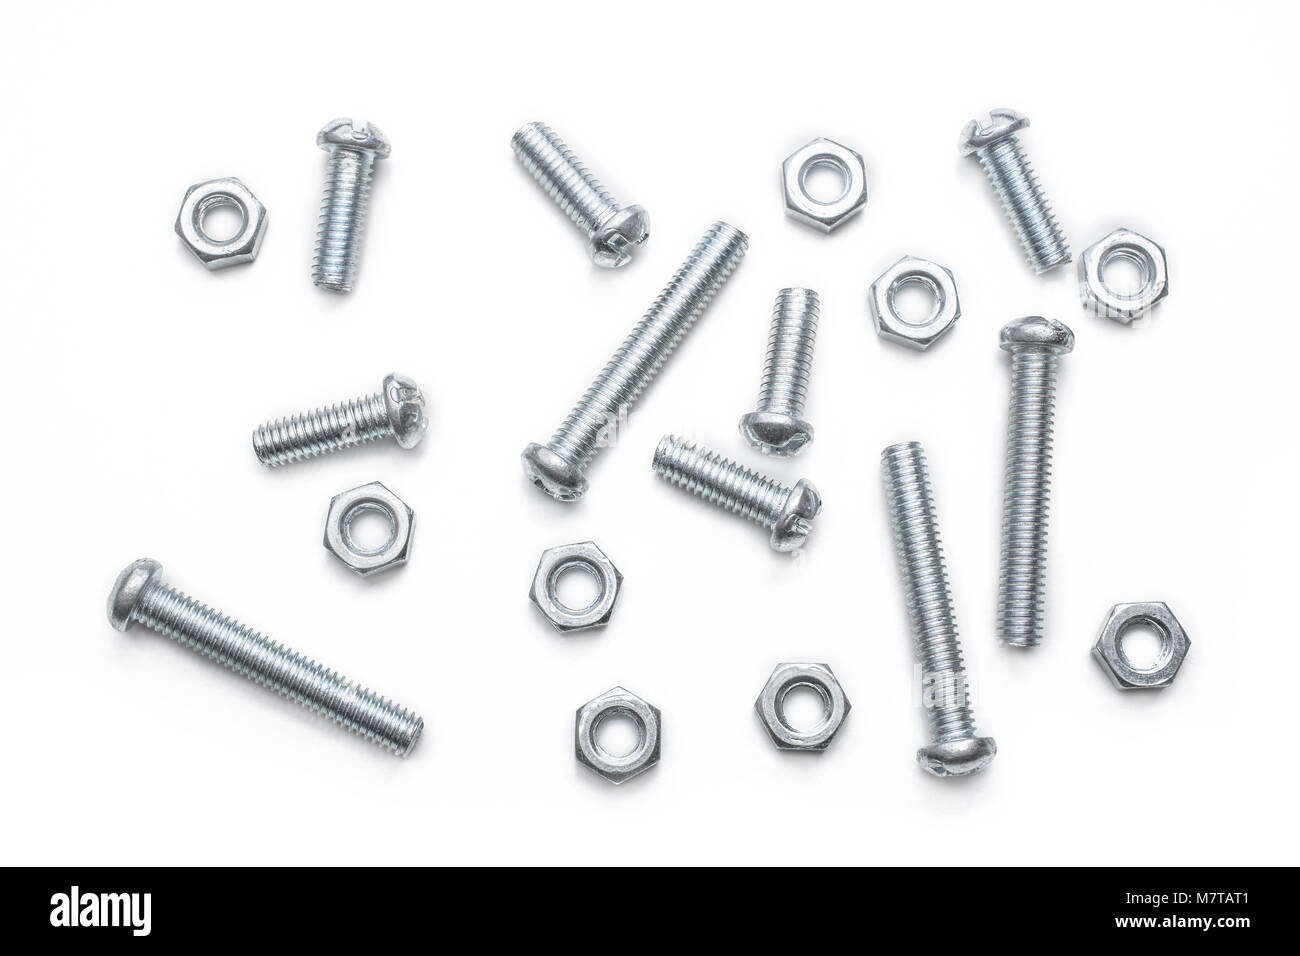 Macro Of A Small Collection Of Iron Screws And Bolts In A Whitebox Stock Photo